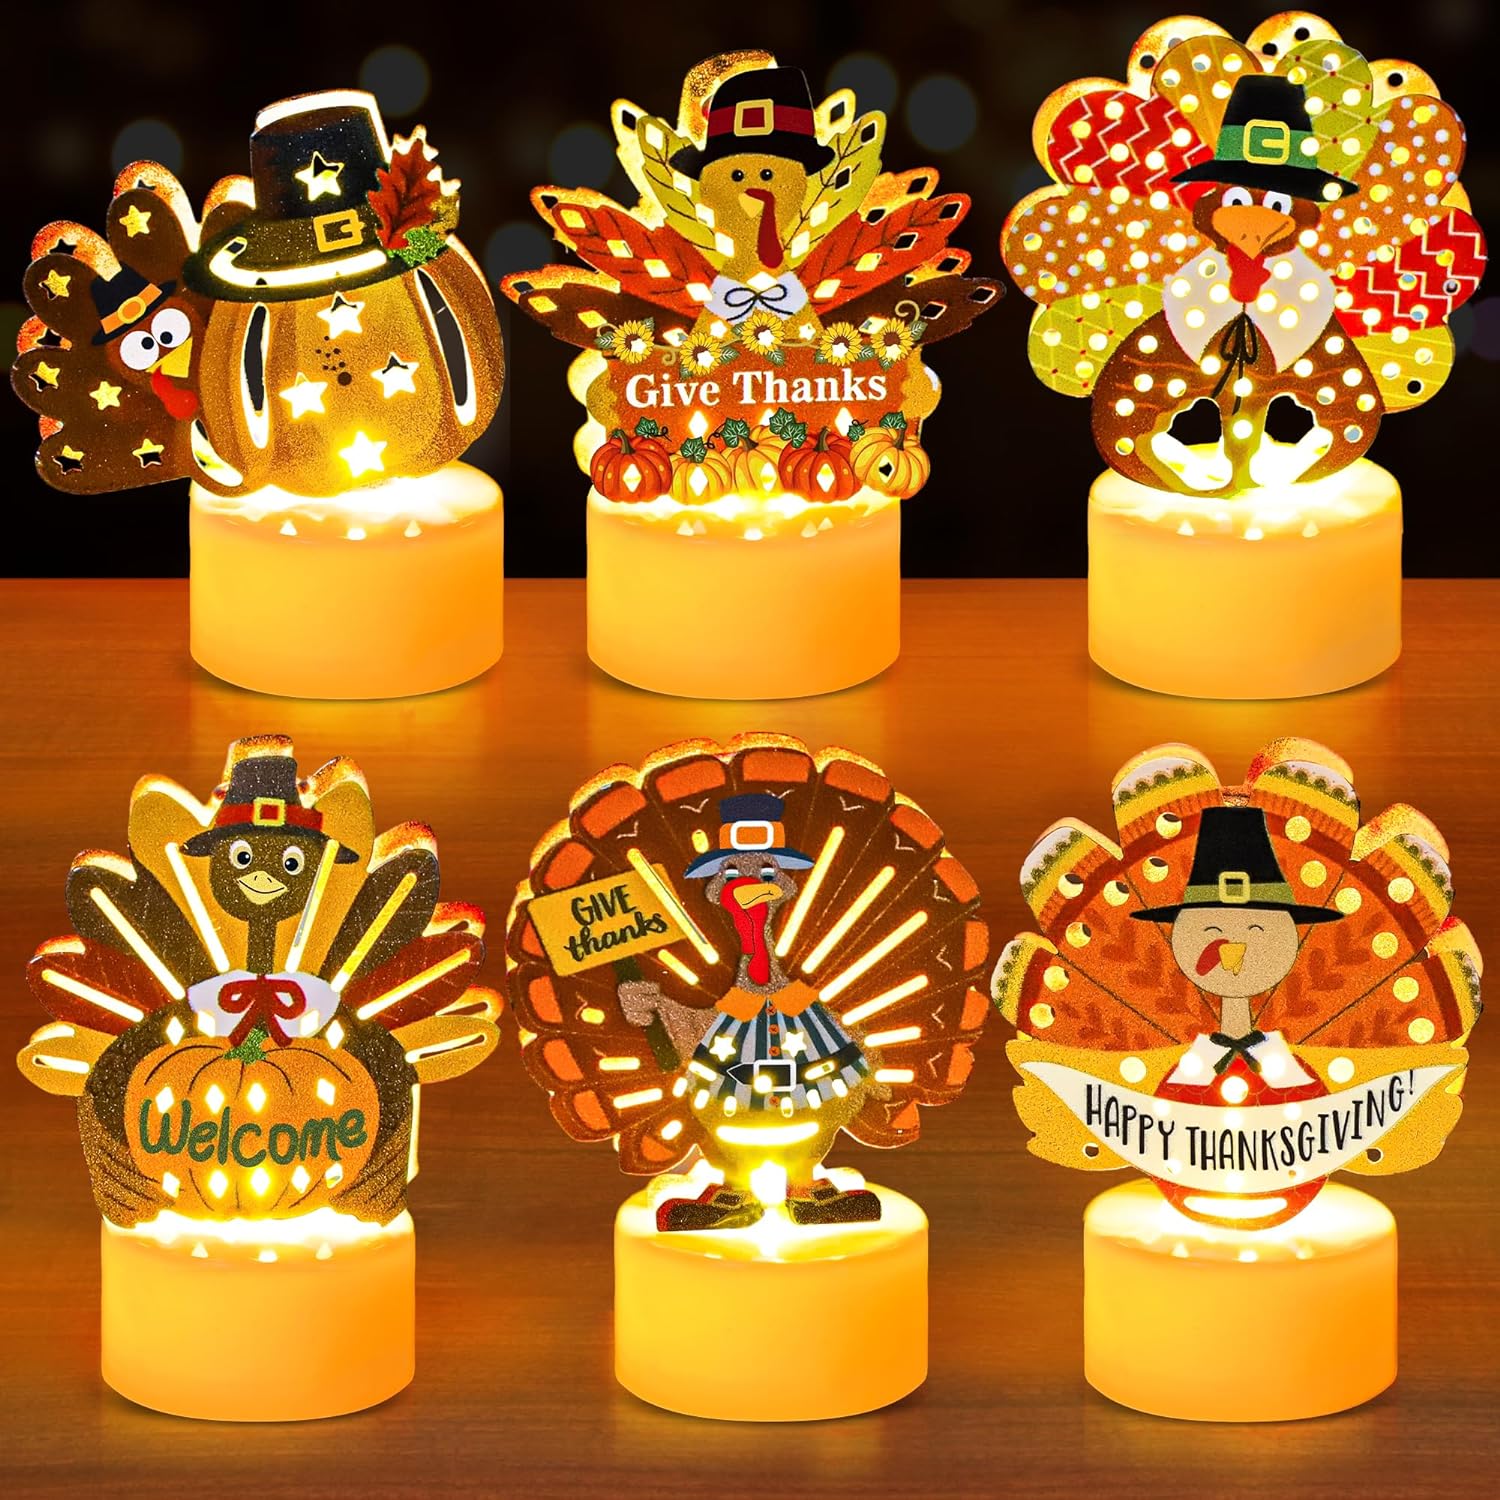 Thanksgiving Table Decorations 6 Pack Flameless Turkey Tea Lights Candles Battery Operated, Thanksgiving Decorations Lights LED Candles for Home Party Gifts, Thanksgiving Centerpieces for Tables Decor